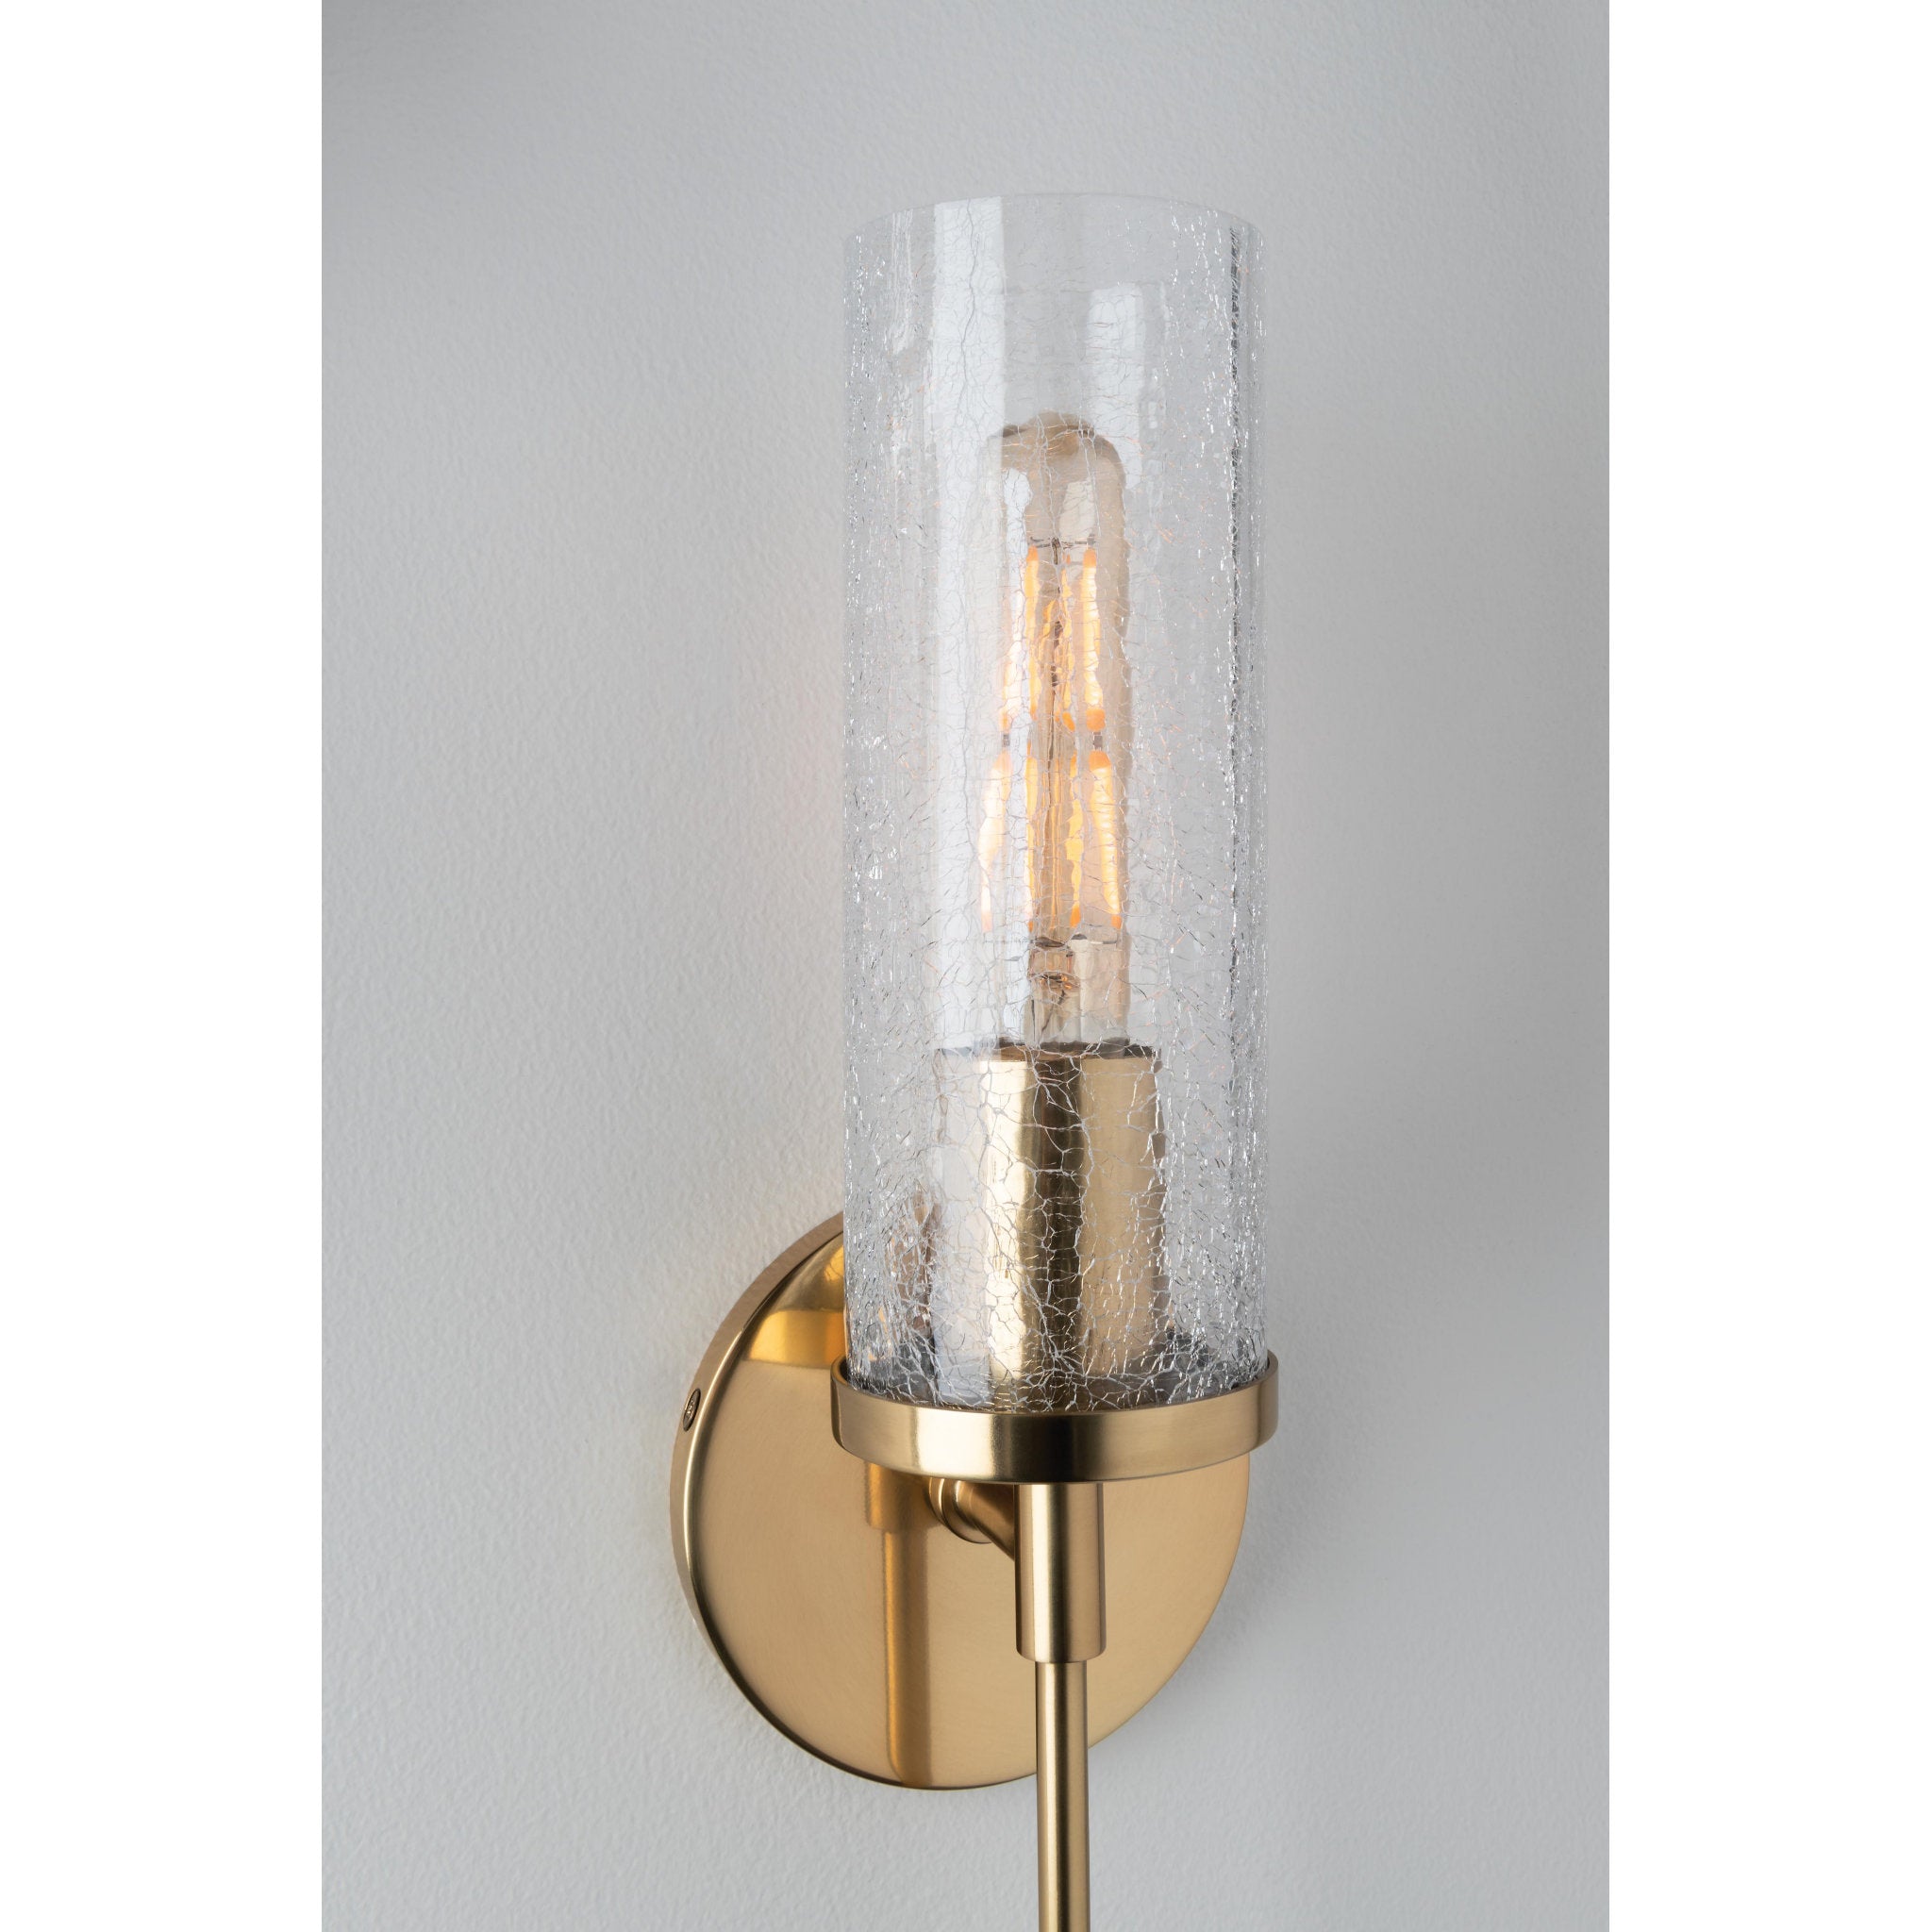 Olivia 1-Light Wall Sconce in Polished Nickel